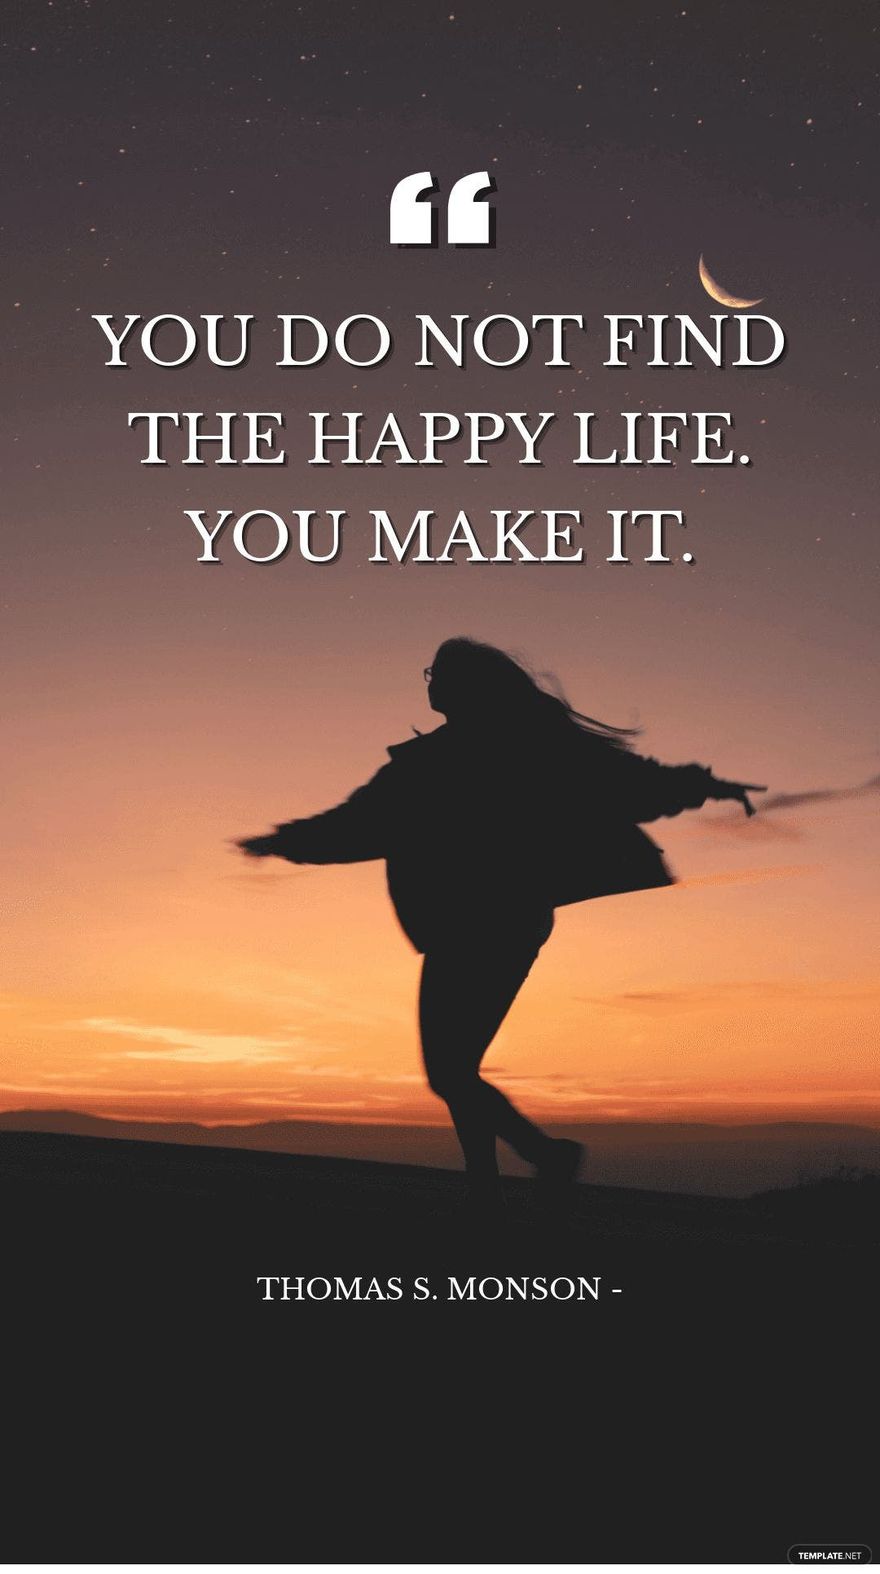 Thomas S. Monson - You do not find the happy life. You make it.